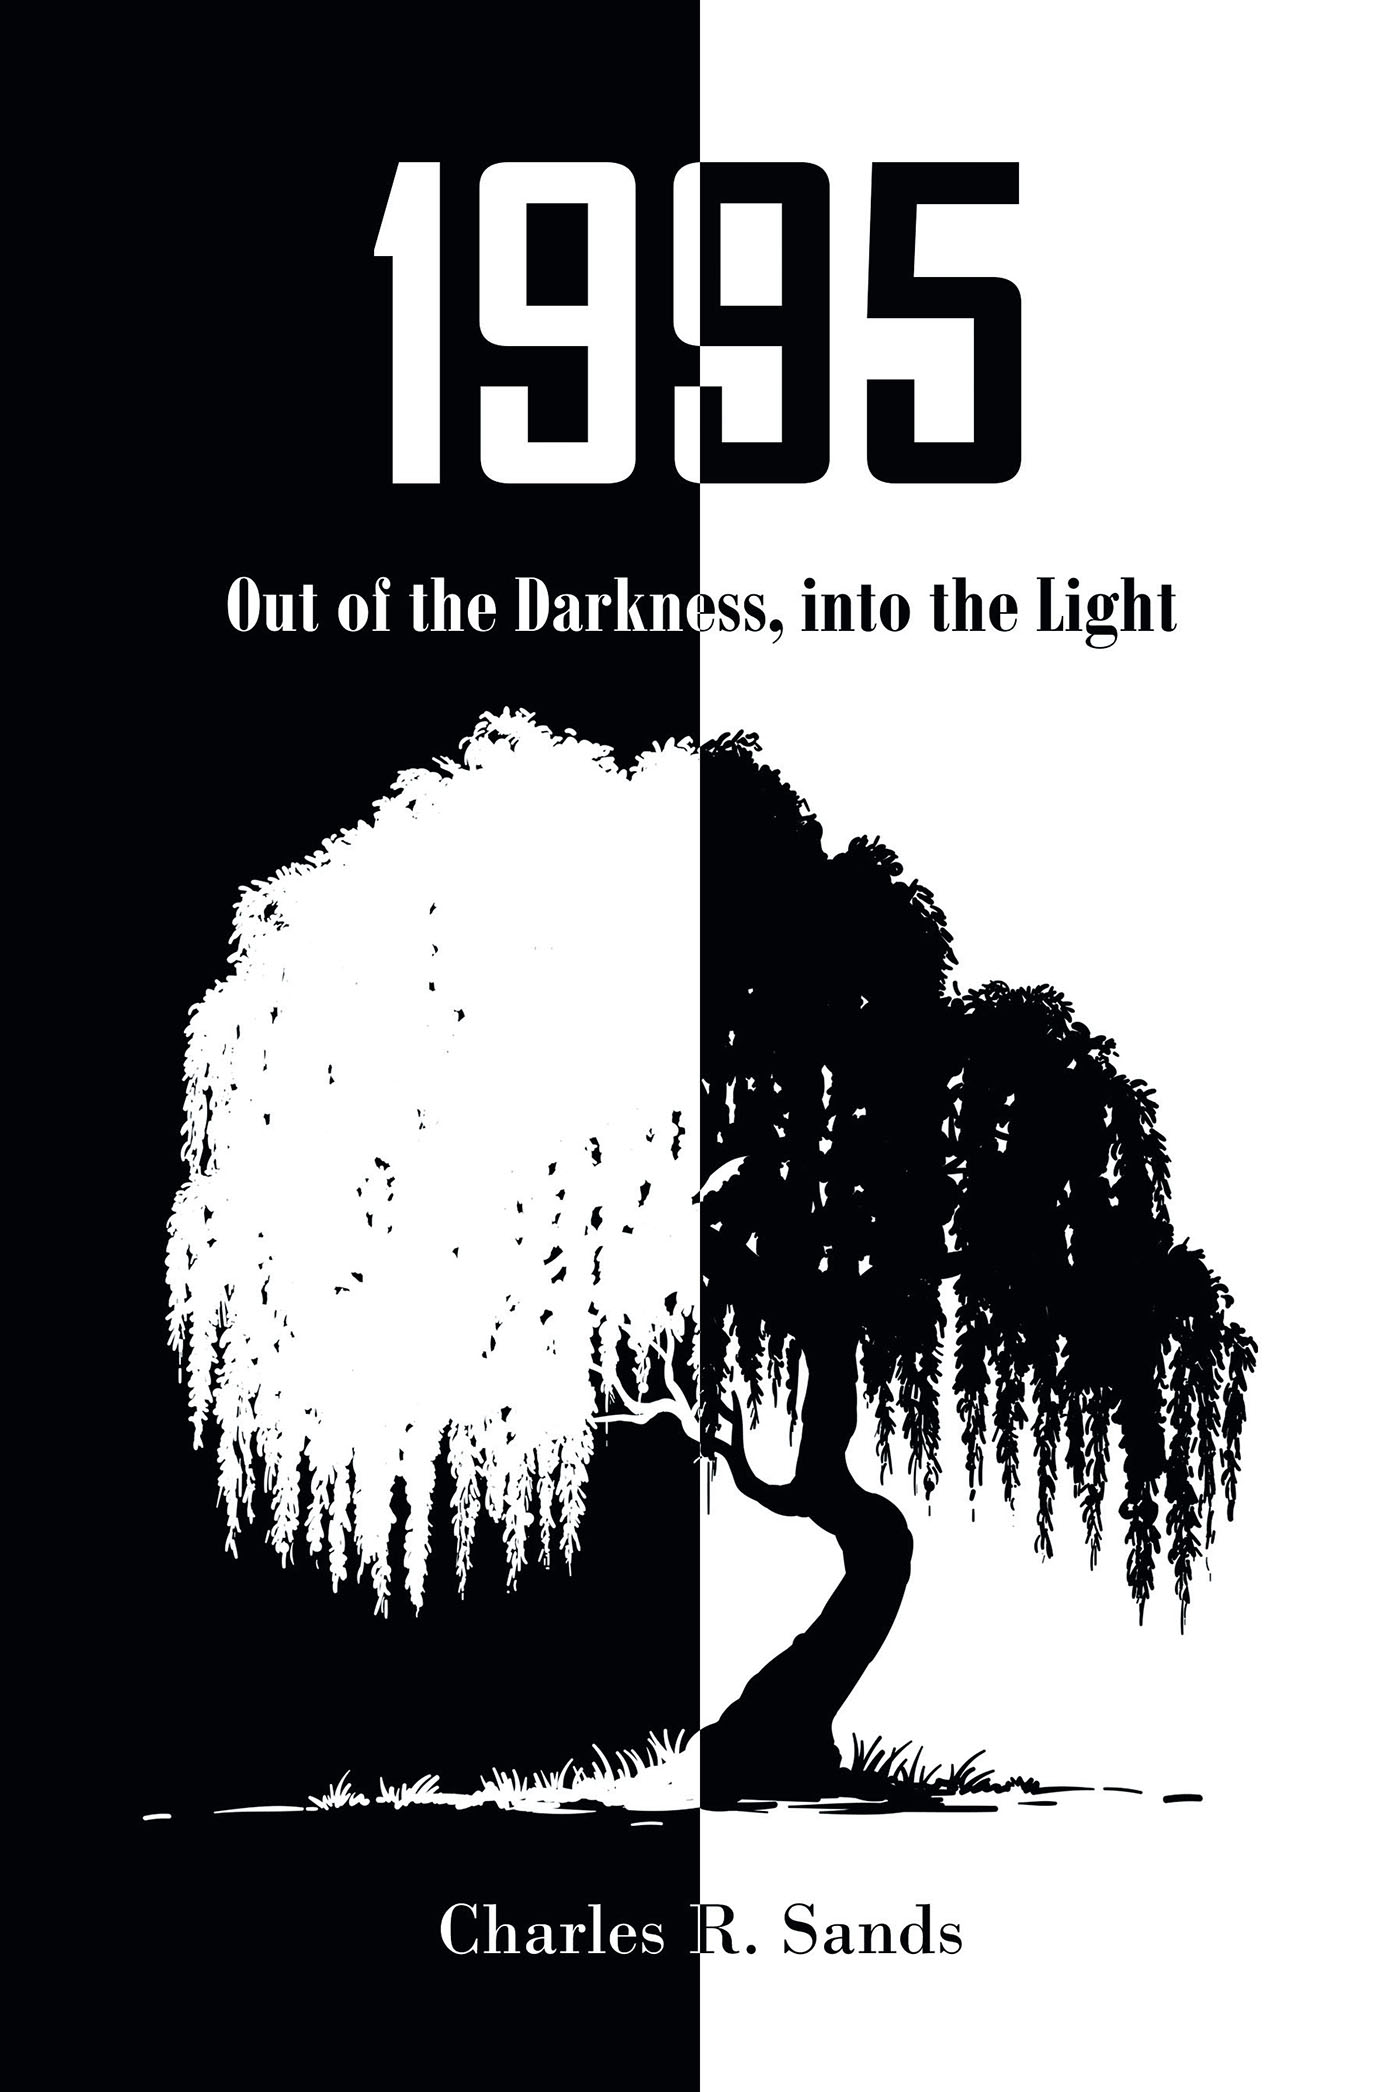 Author Charles R. Sands’s New Book, “1995: Out of the Darkness, into the Light,” is a Powerful Account of How the Author Accepted the Journey God Had Planned for Him